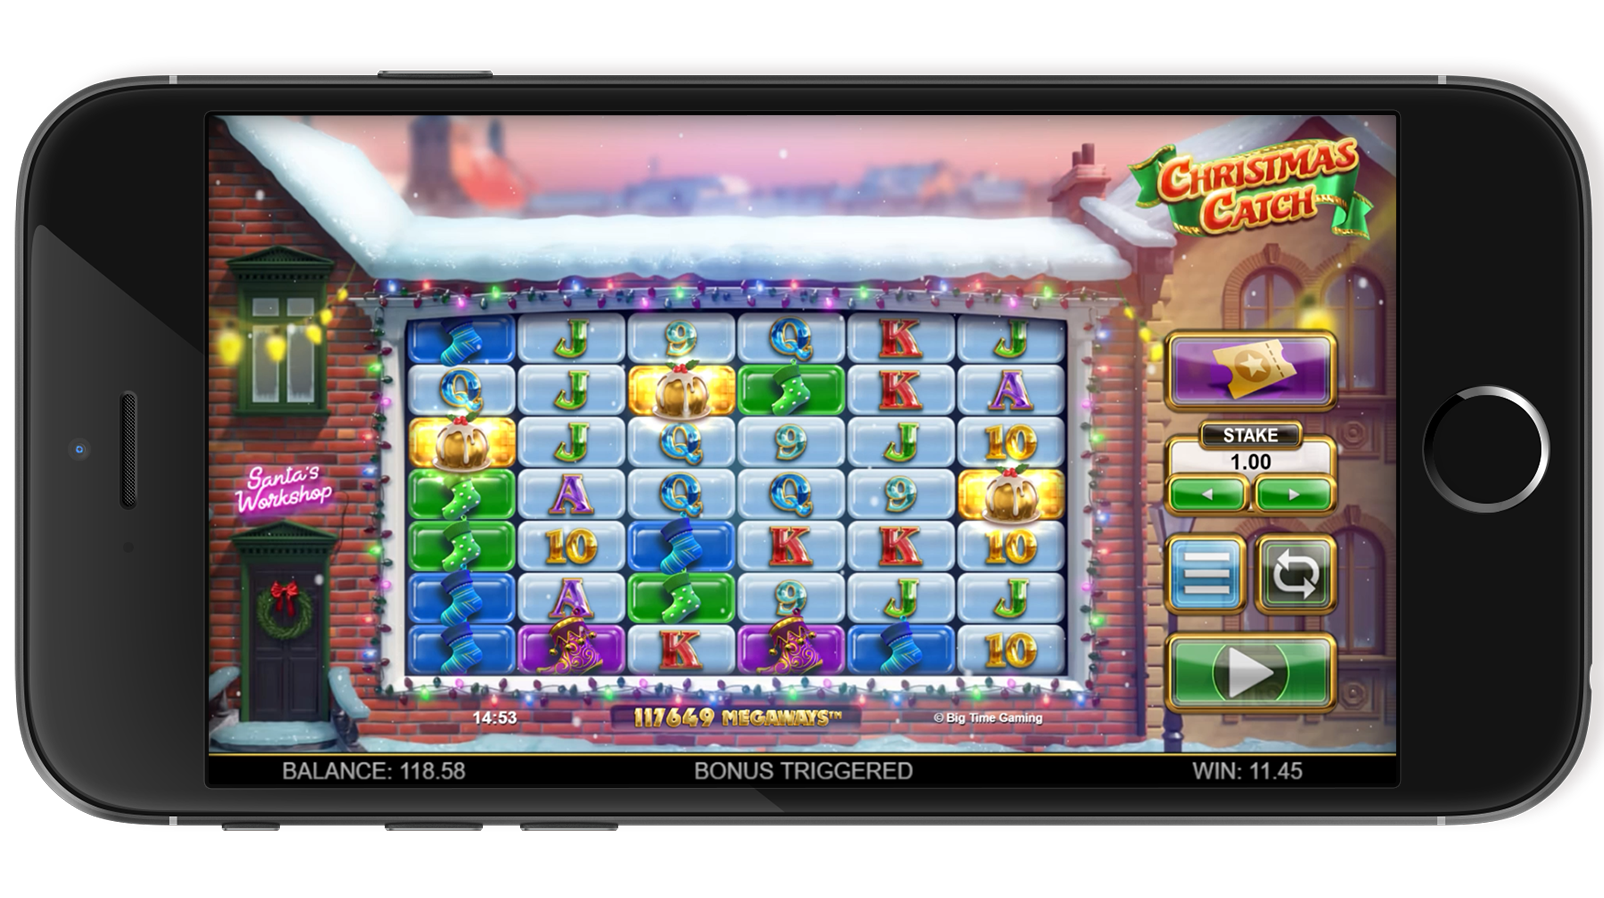 ChristmasCatch_FreeSpins_Trigger_mobile.png